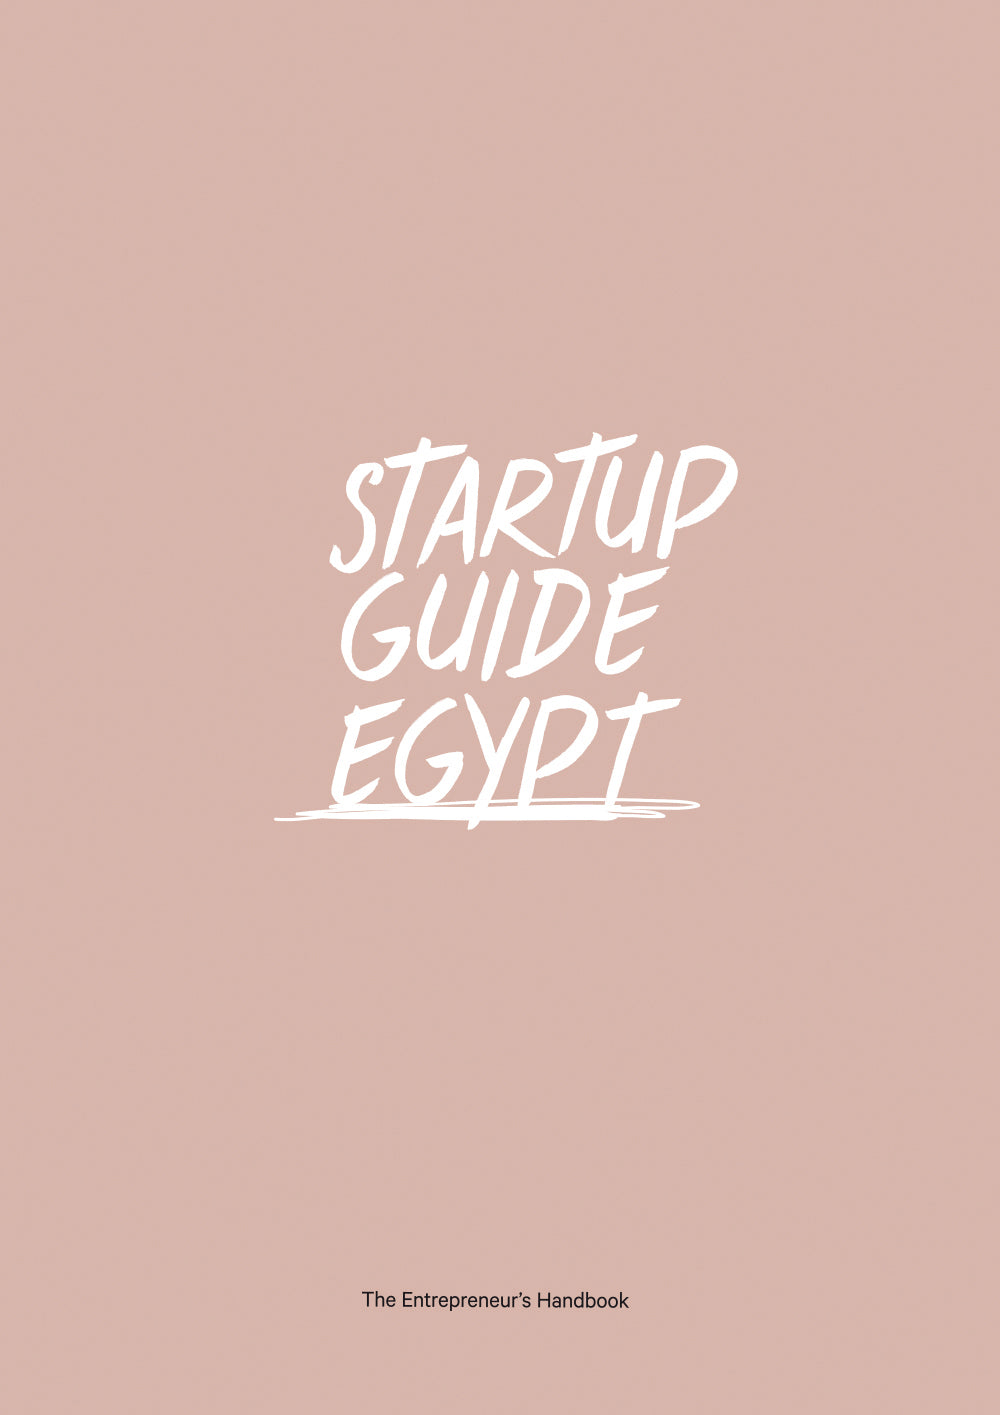 Startup Guide Egypt cover